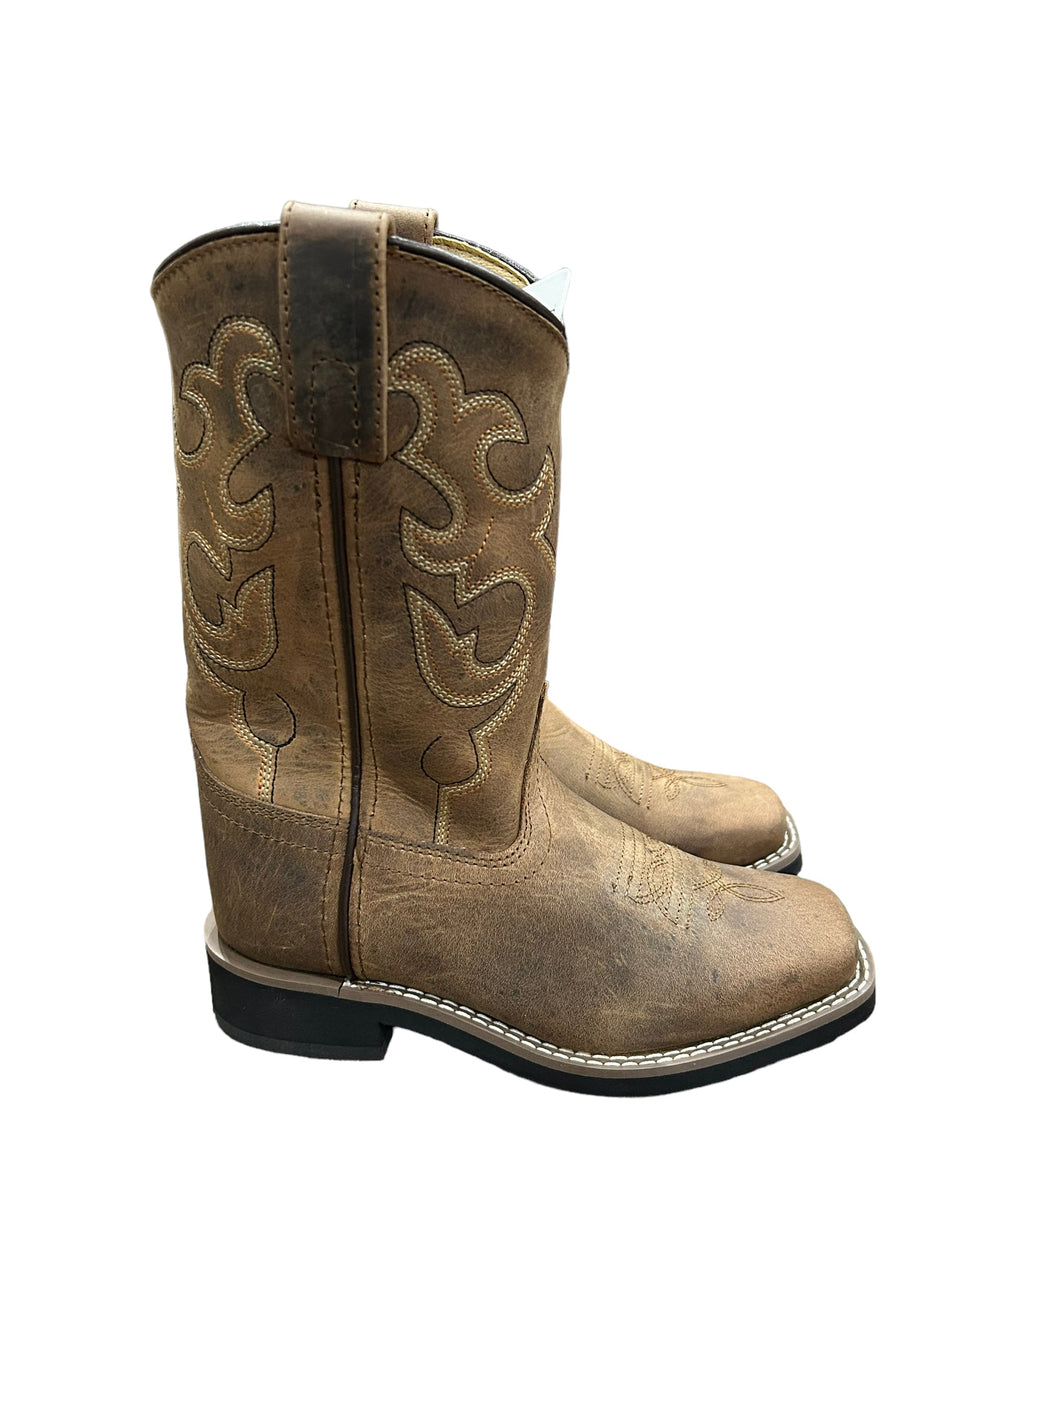 Smoky Mountain Boots 3520Y Pueblo Western Youth Boots